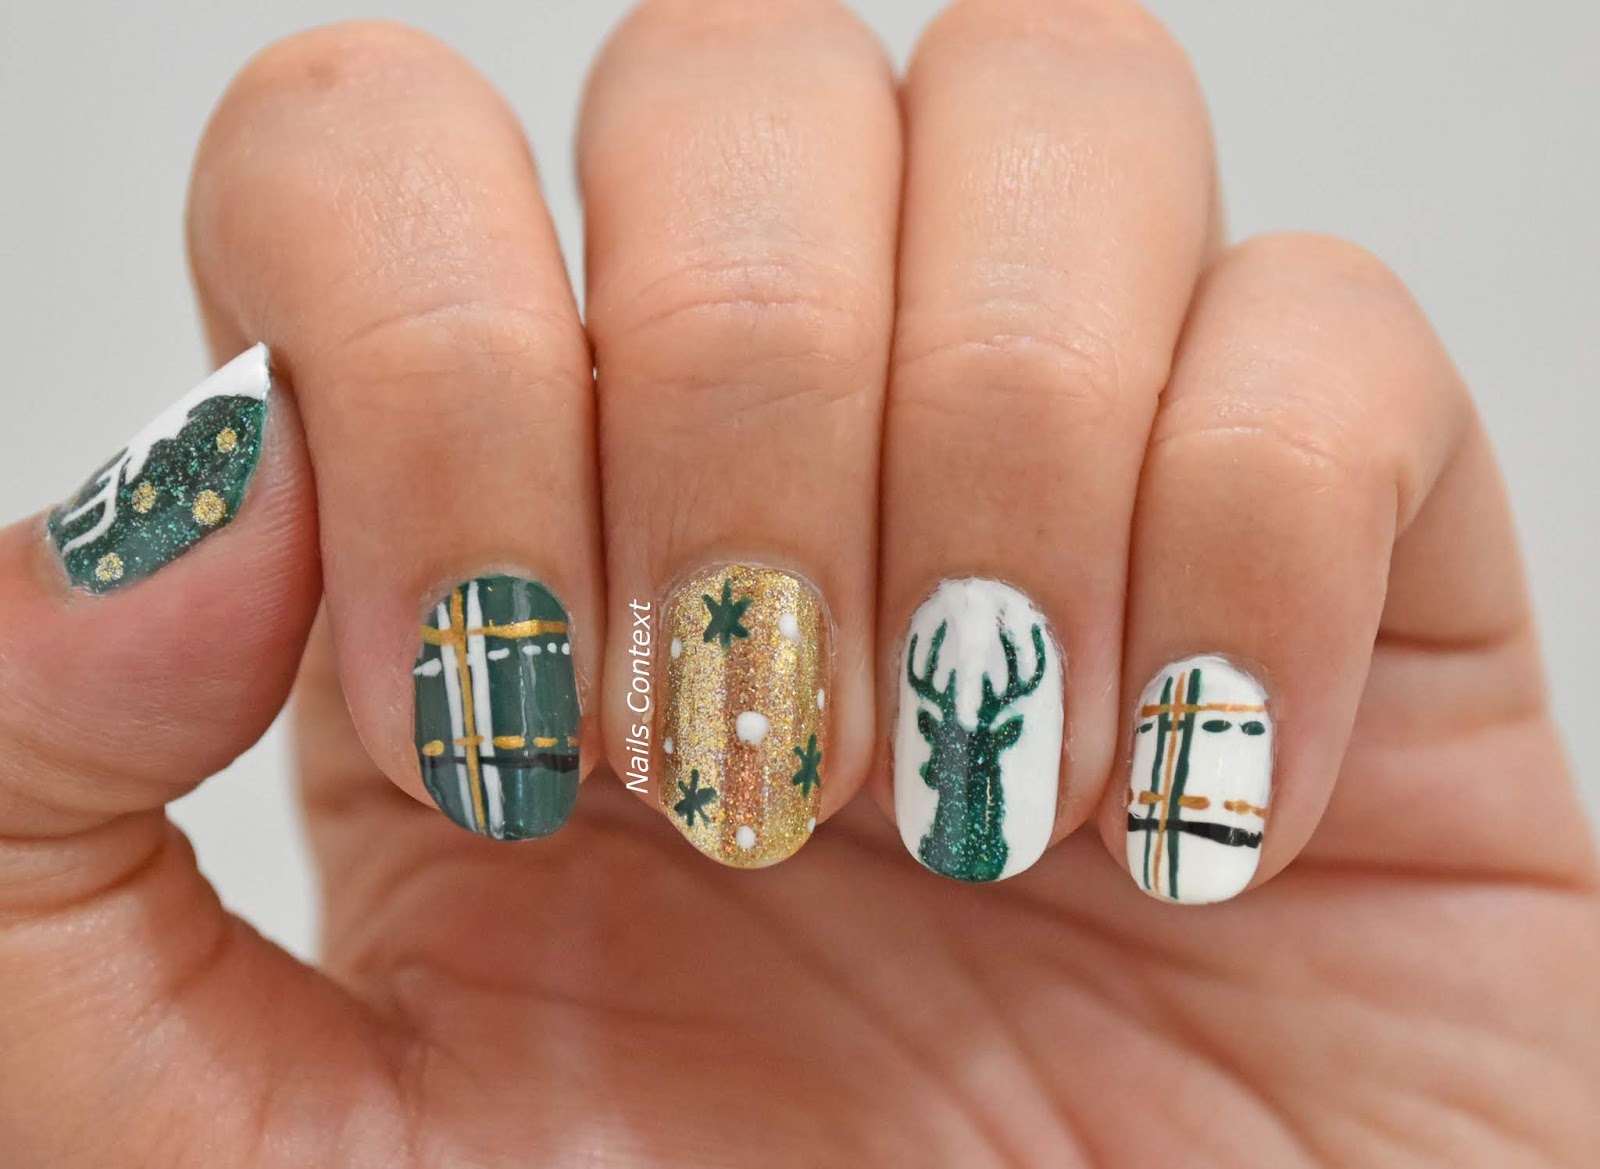 7. Cute Reindeer Nail Art for Pointy Nails - wide 4